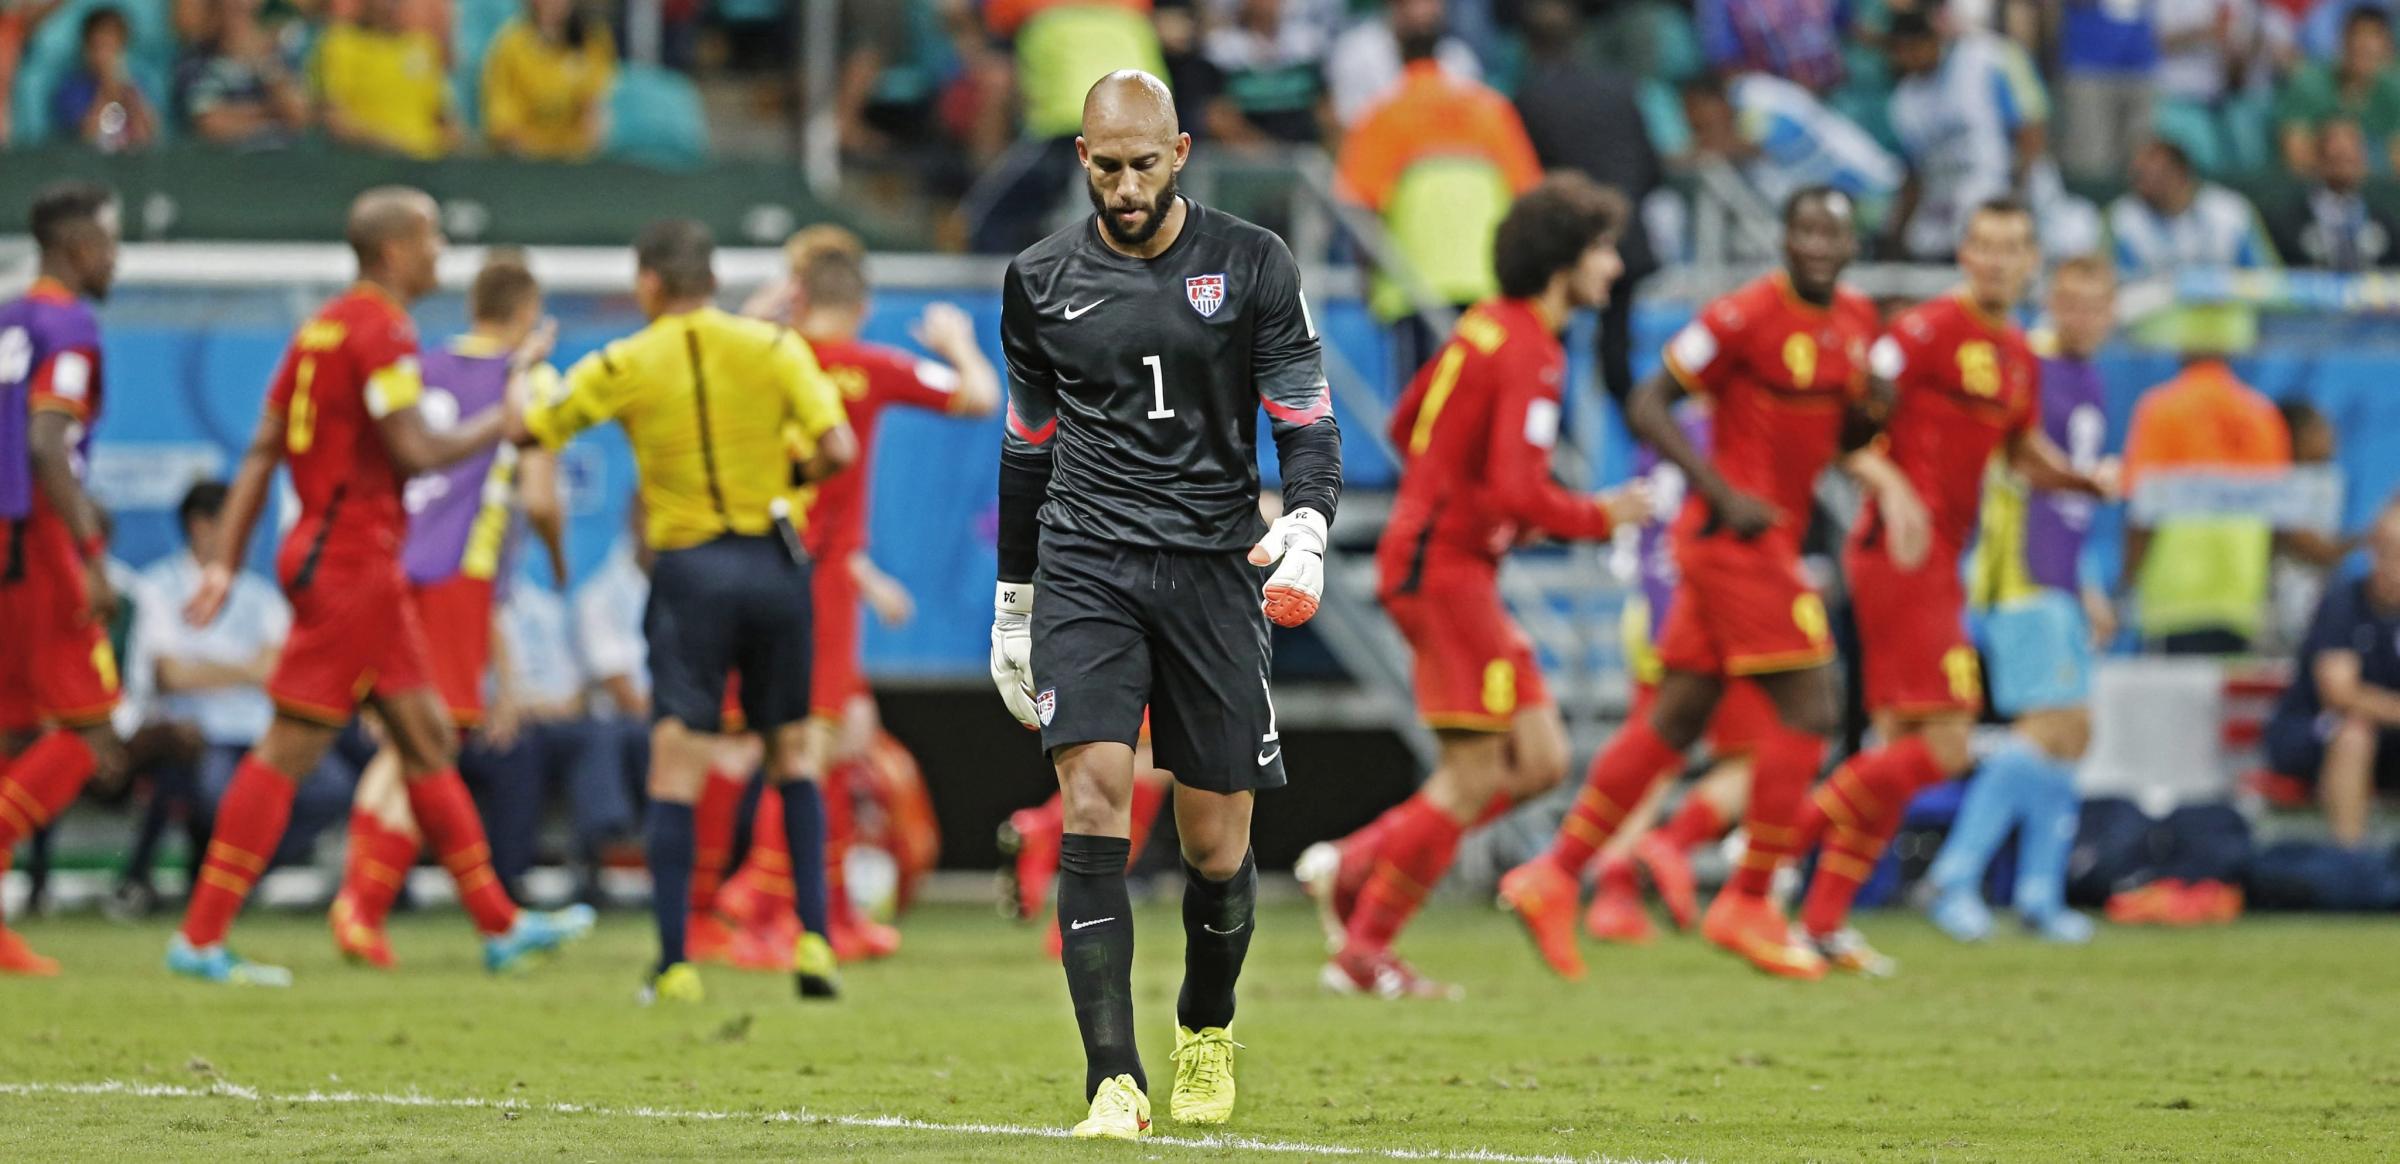 USA's goalkeeper Tim Howard reacts as Belgium's players celebrate their goal during the FIFA World Cup 2014 round of 16 match between Belgium and the USA at the Arena Fonte Nova in Salvador, Brazil on July 1, 2014.